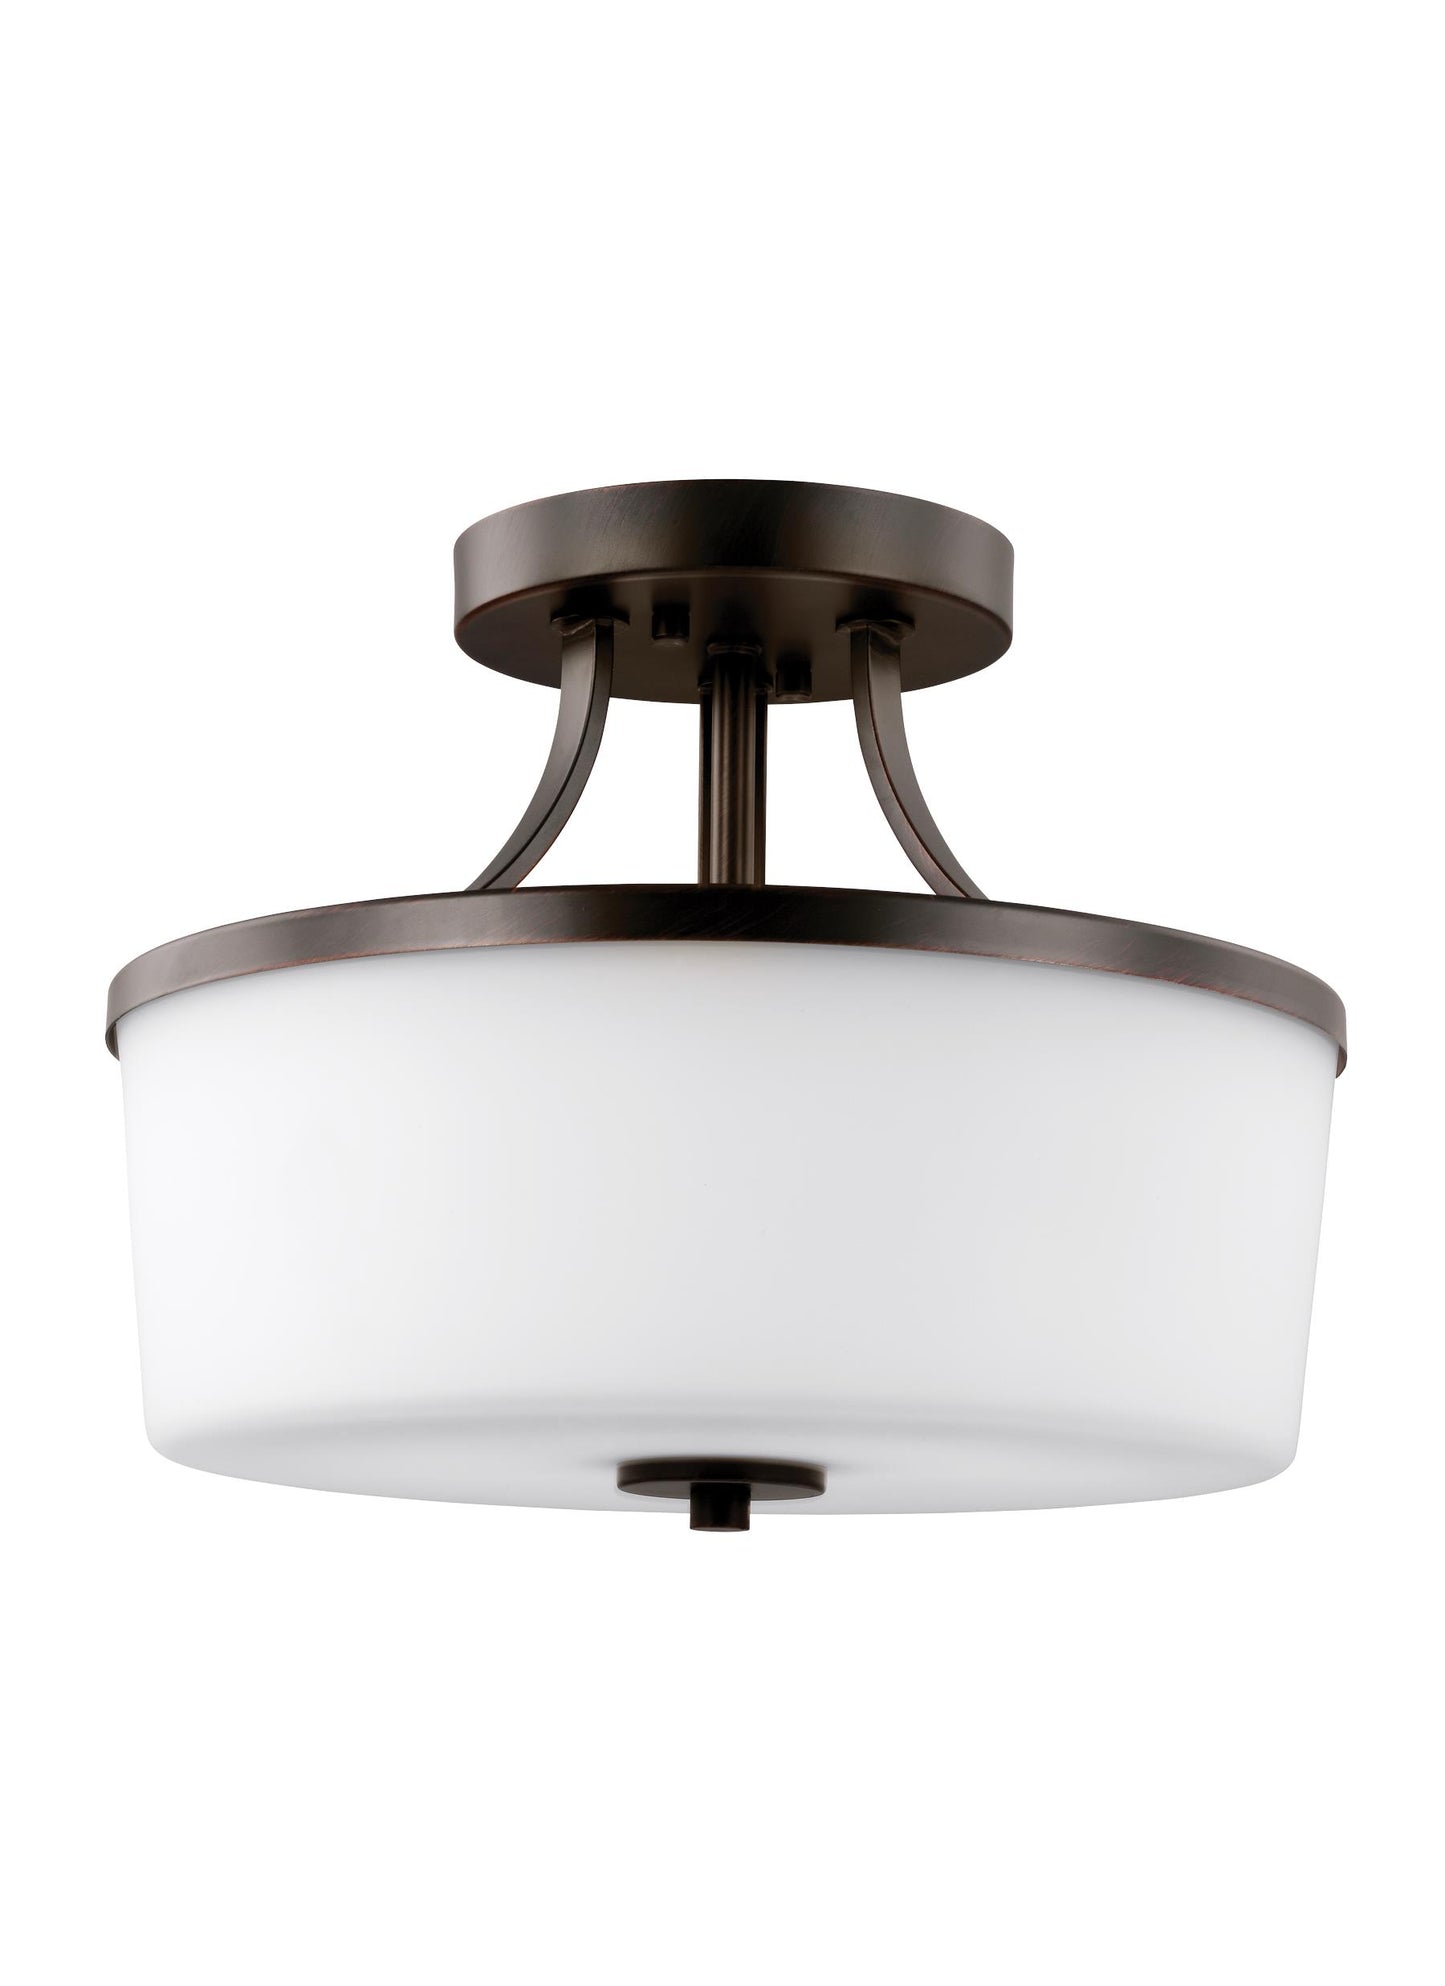 Hettinger transitional 2-light indoor dimmable ceiling flush mount in bronze finish with etched white inside glass shade